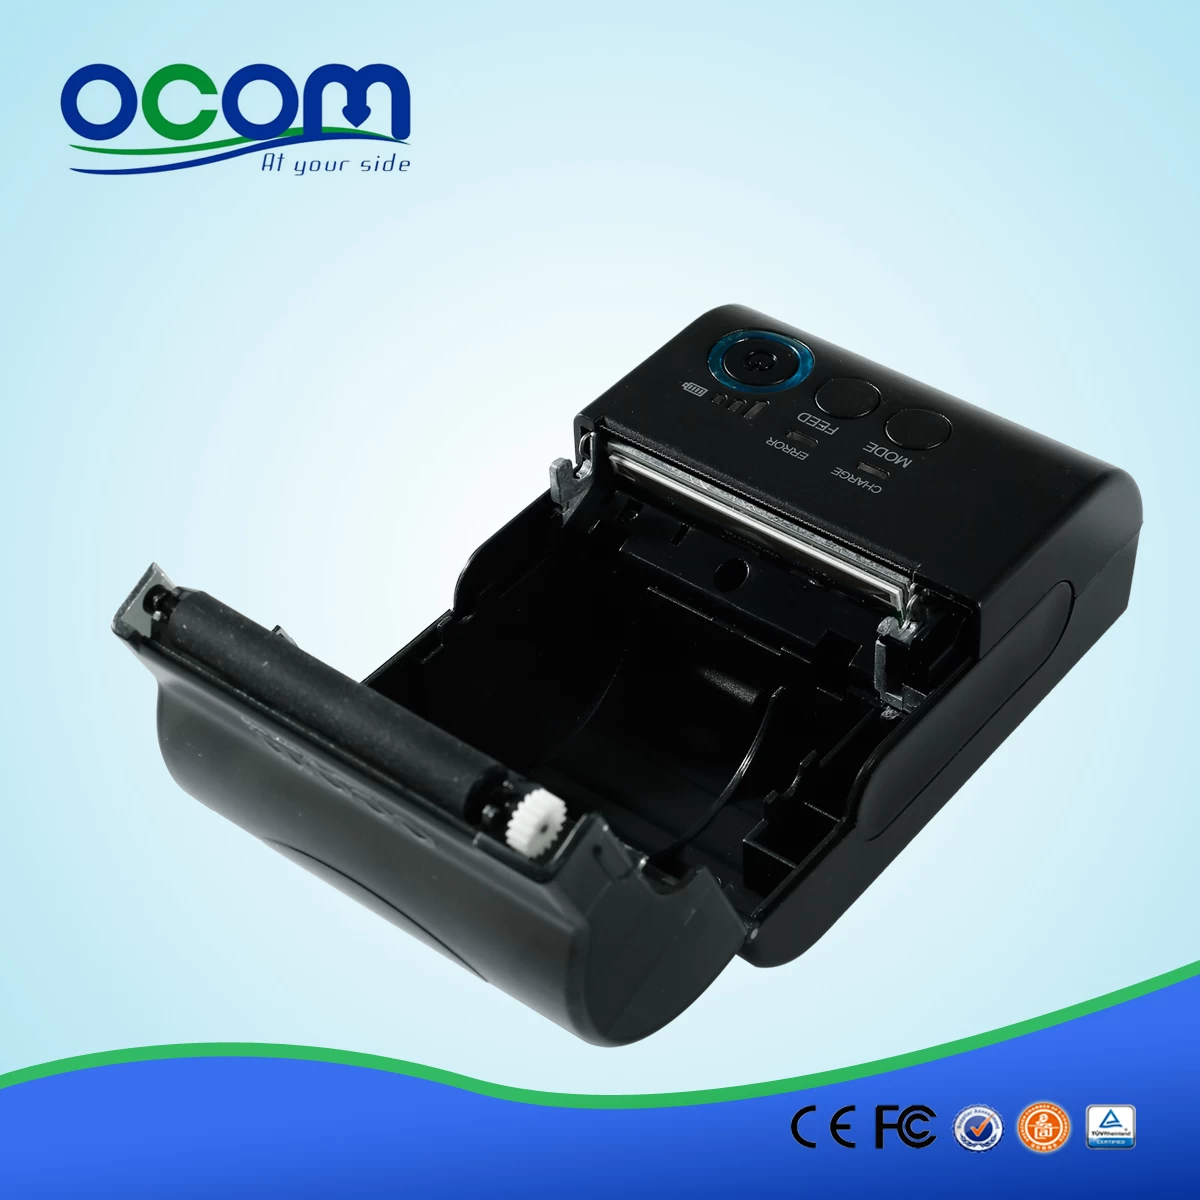 China Made Android SDK supplied Mobile Bluetooth receipt printer-OCPP-M03